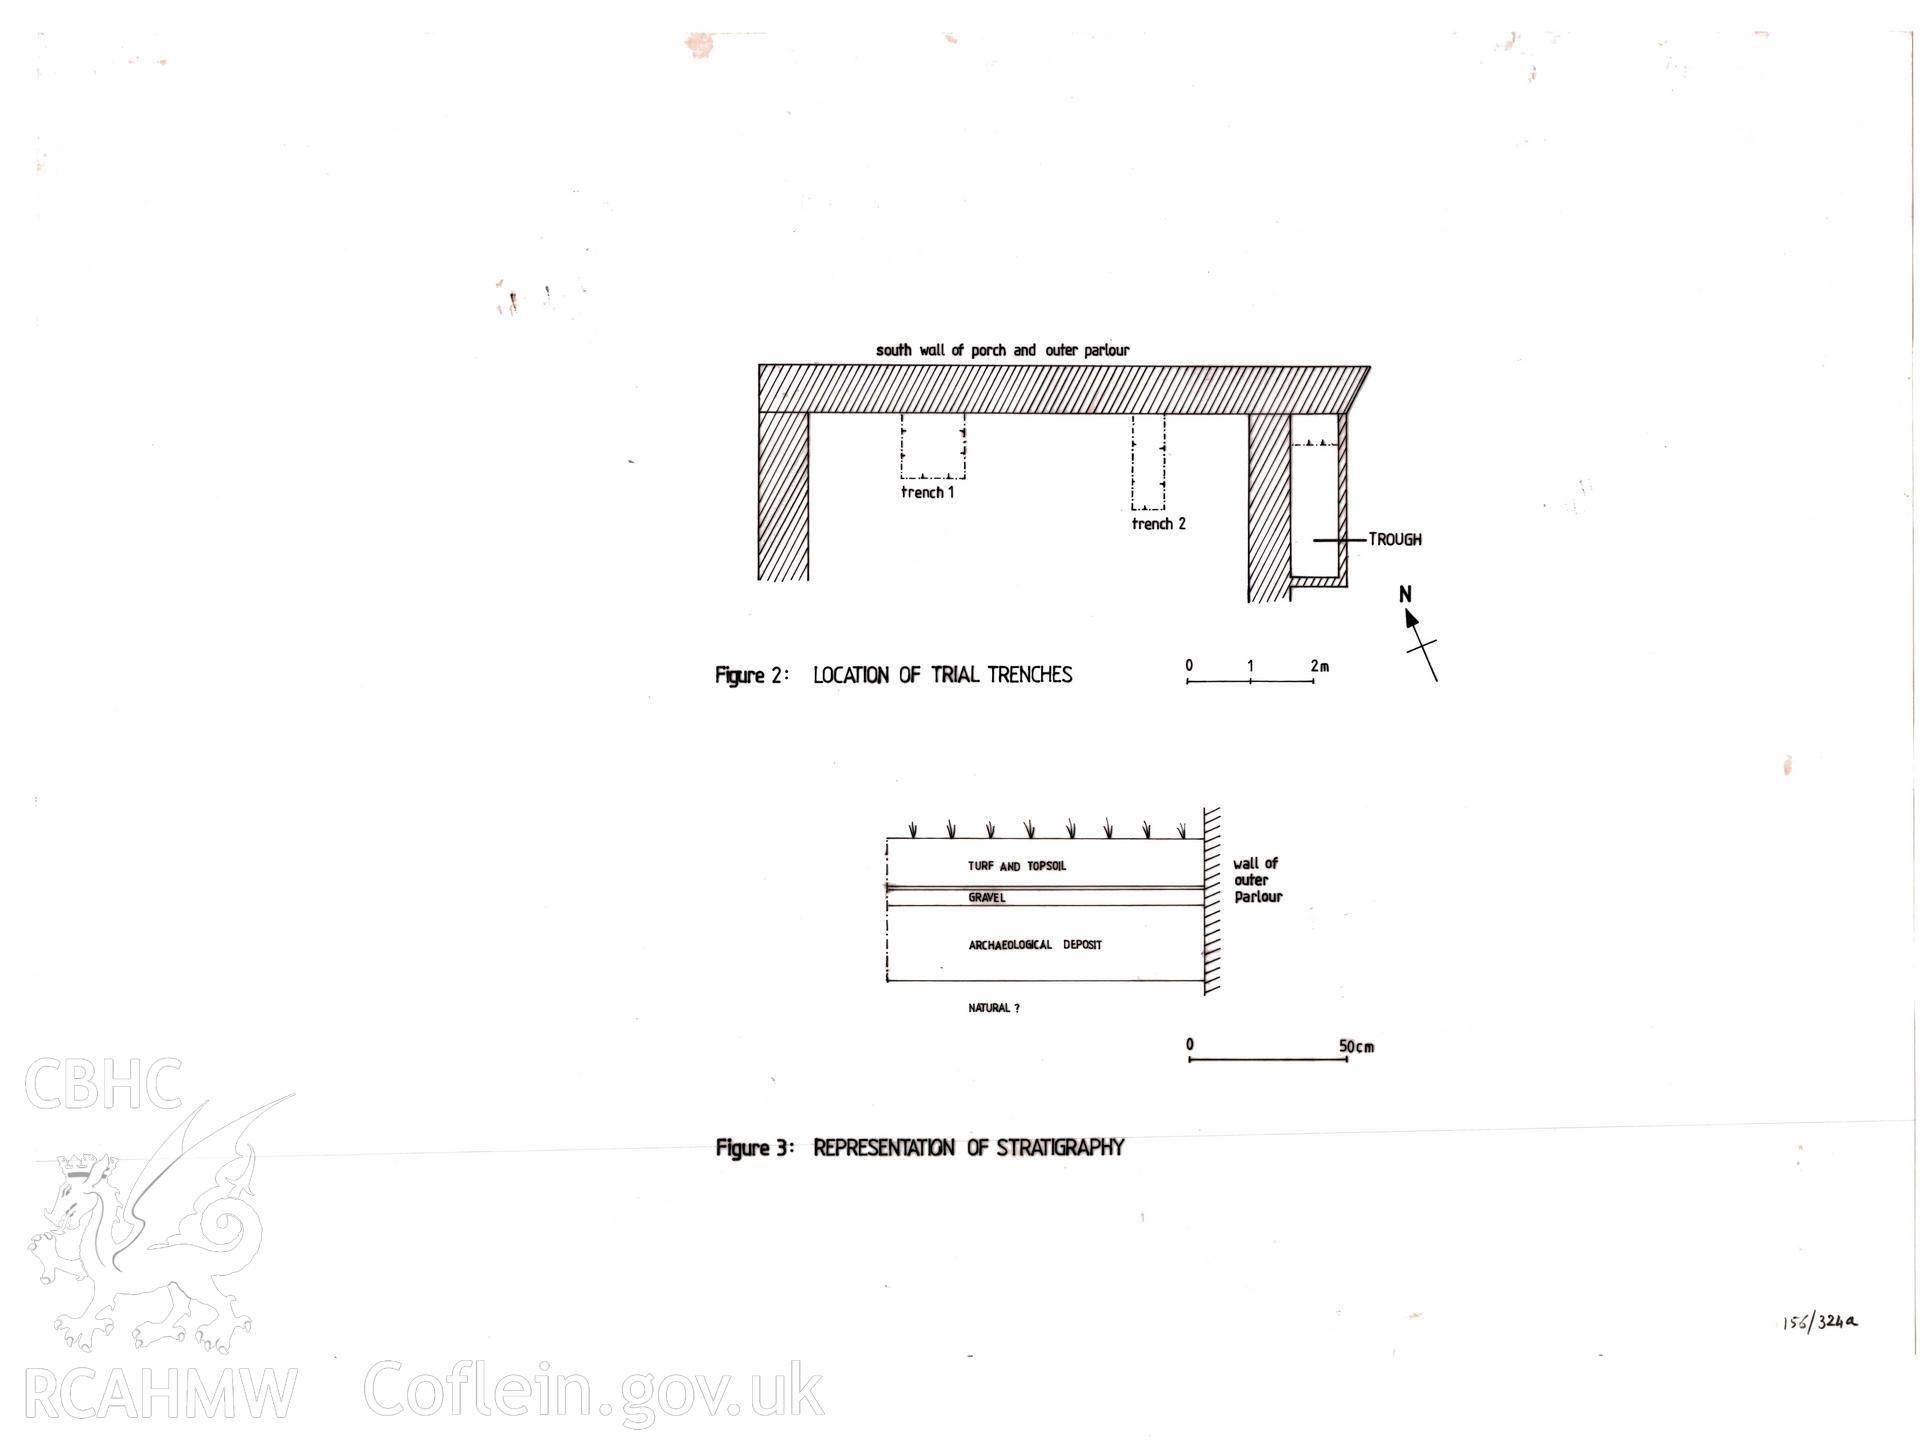 Cadw guardianship monument drawing, location of trial trenches against south wall of porch and outer parlour, fig2 and representation of stratigraphy, Tintern Abbey.